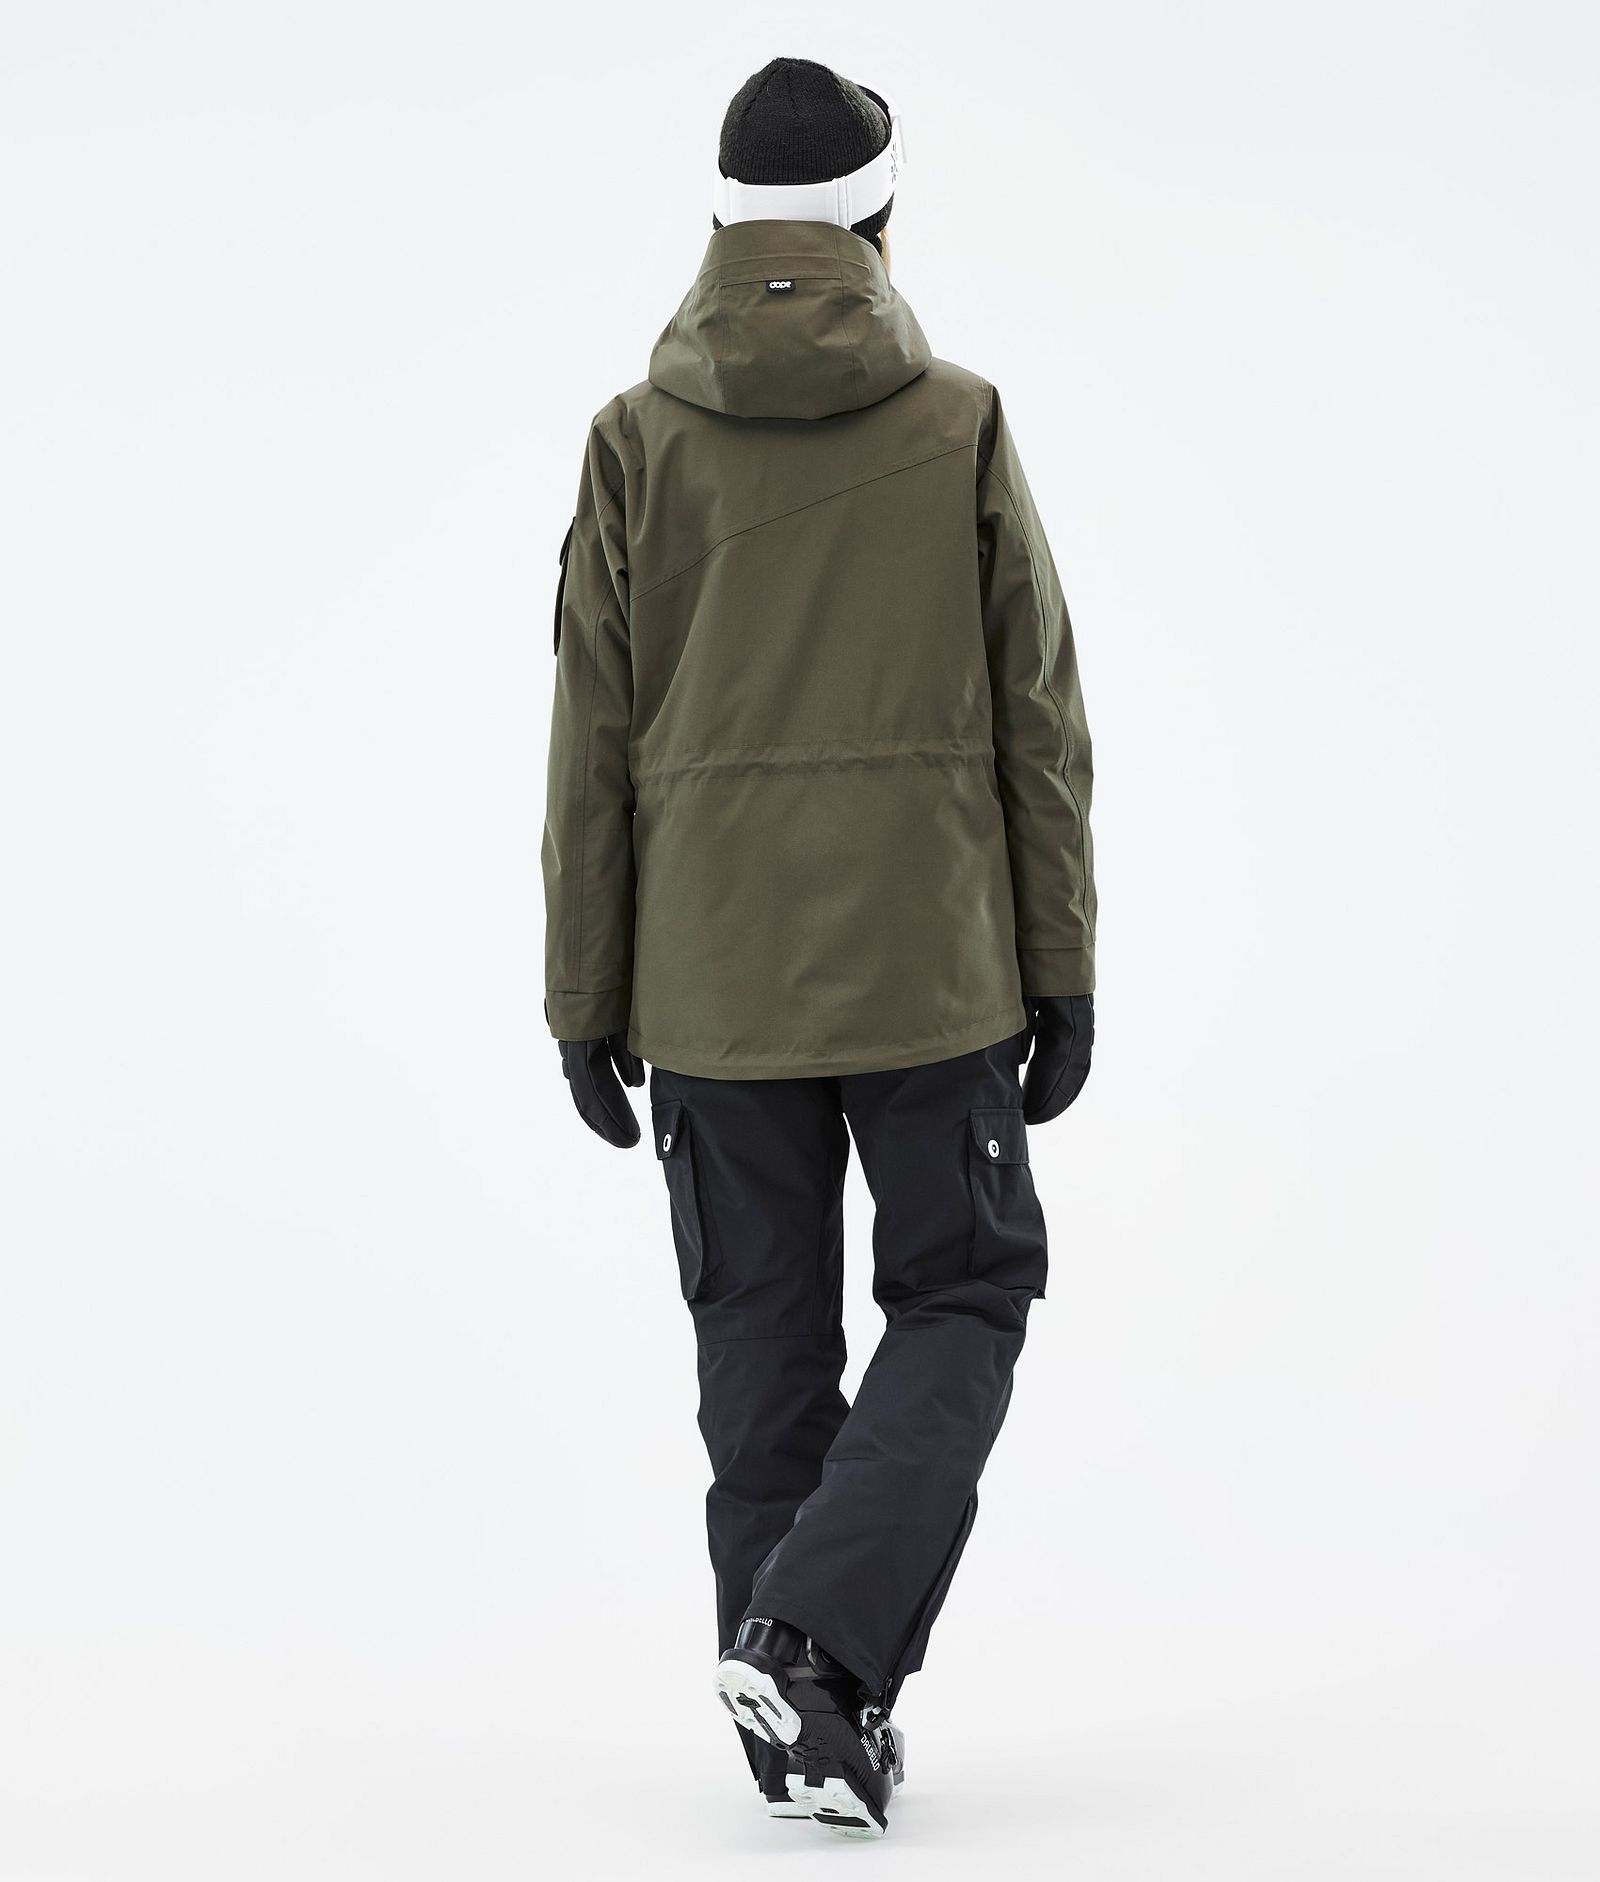 Adept W Skidoutfit Dam Olive Green/Black